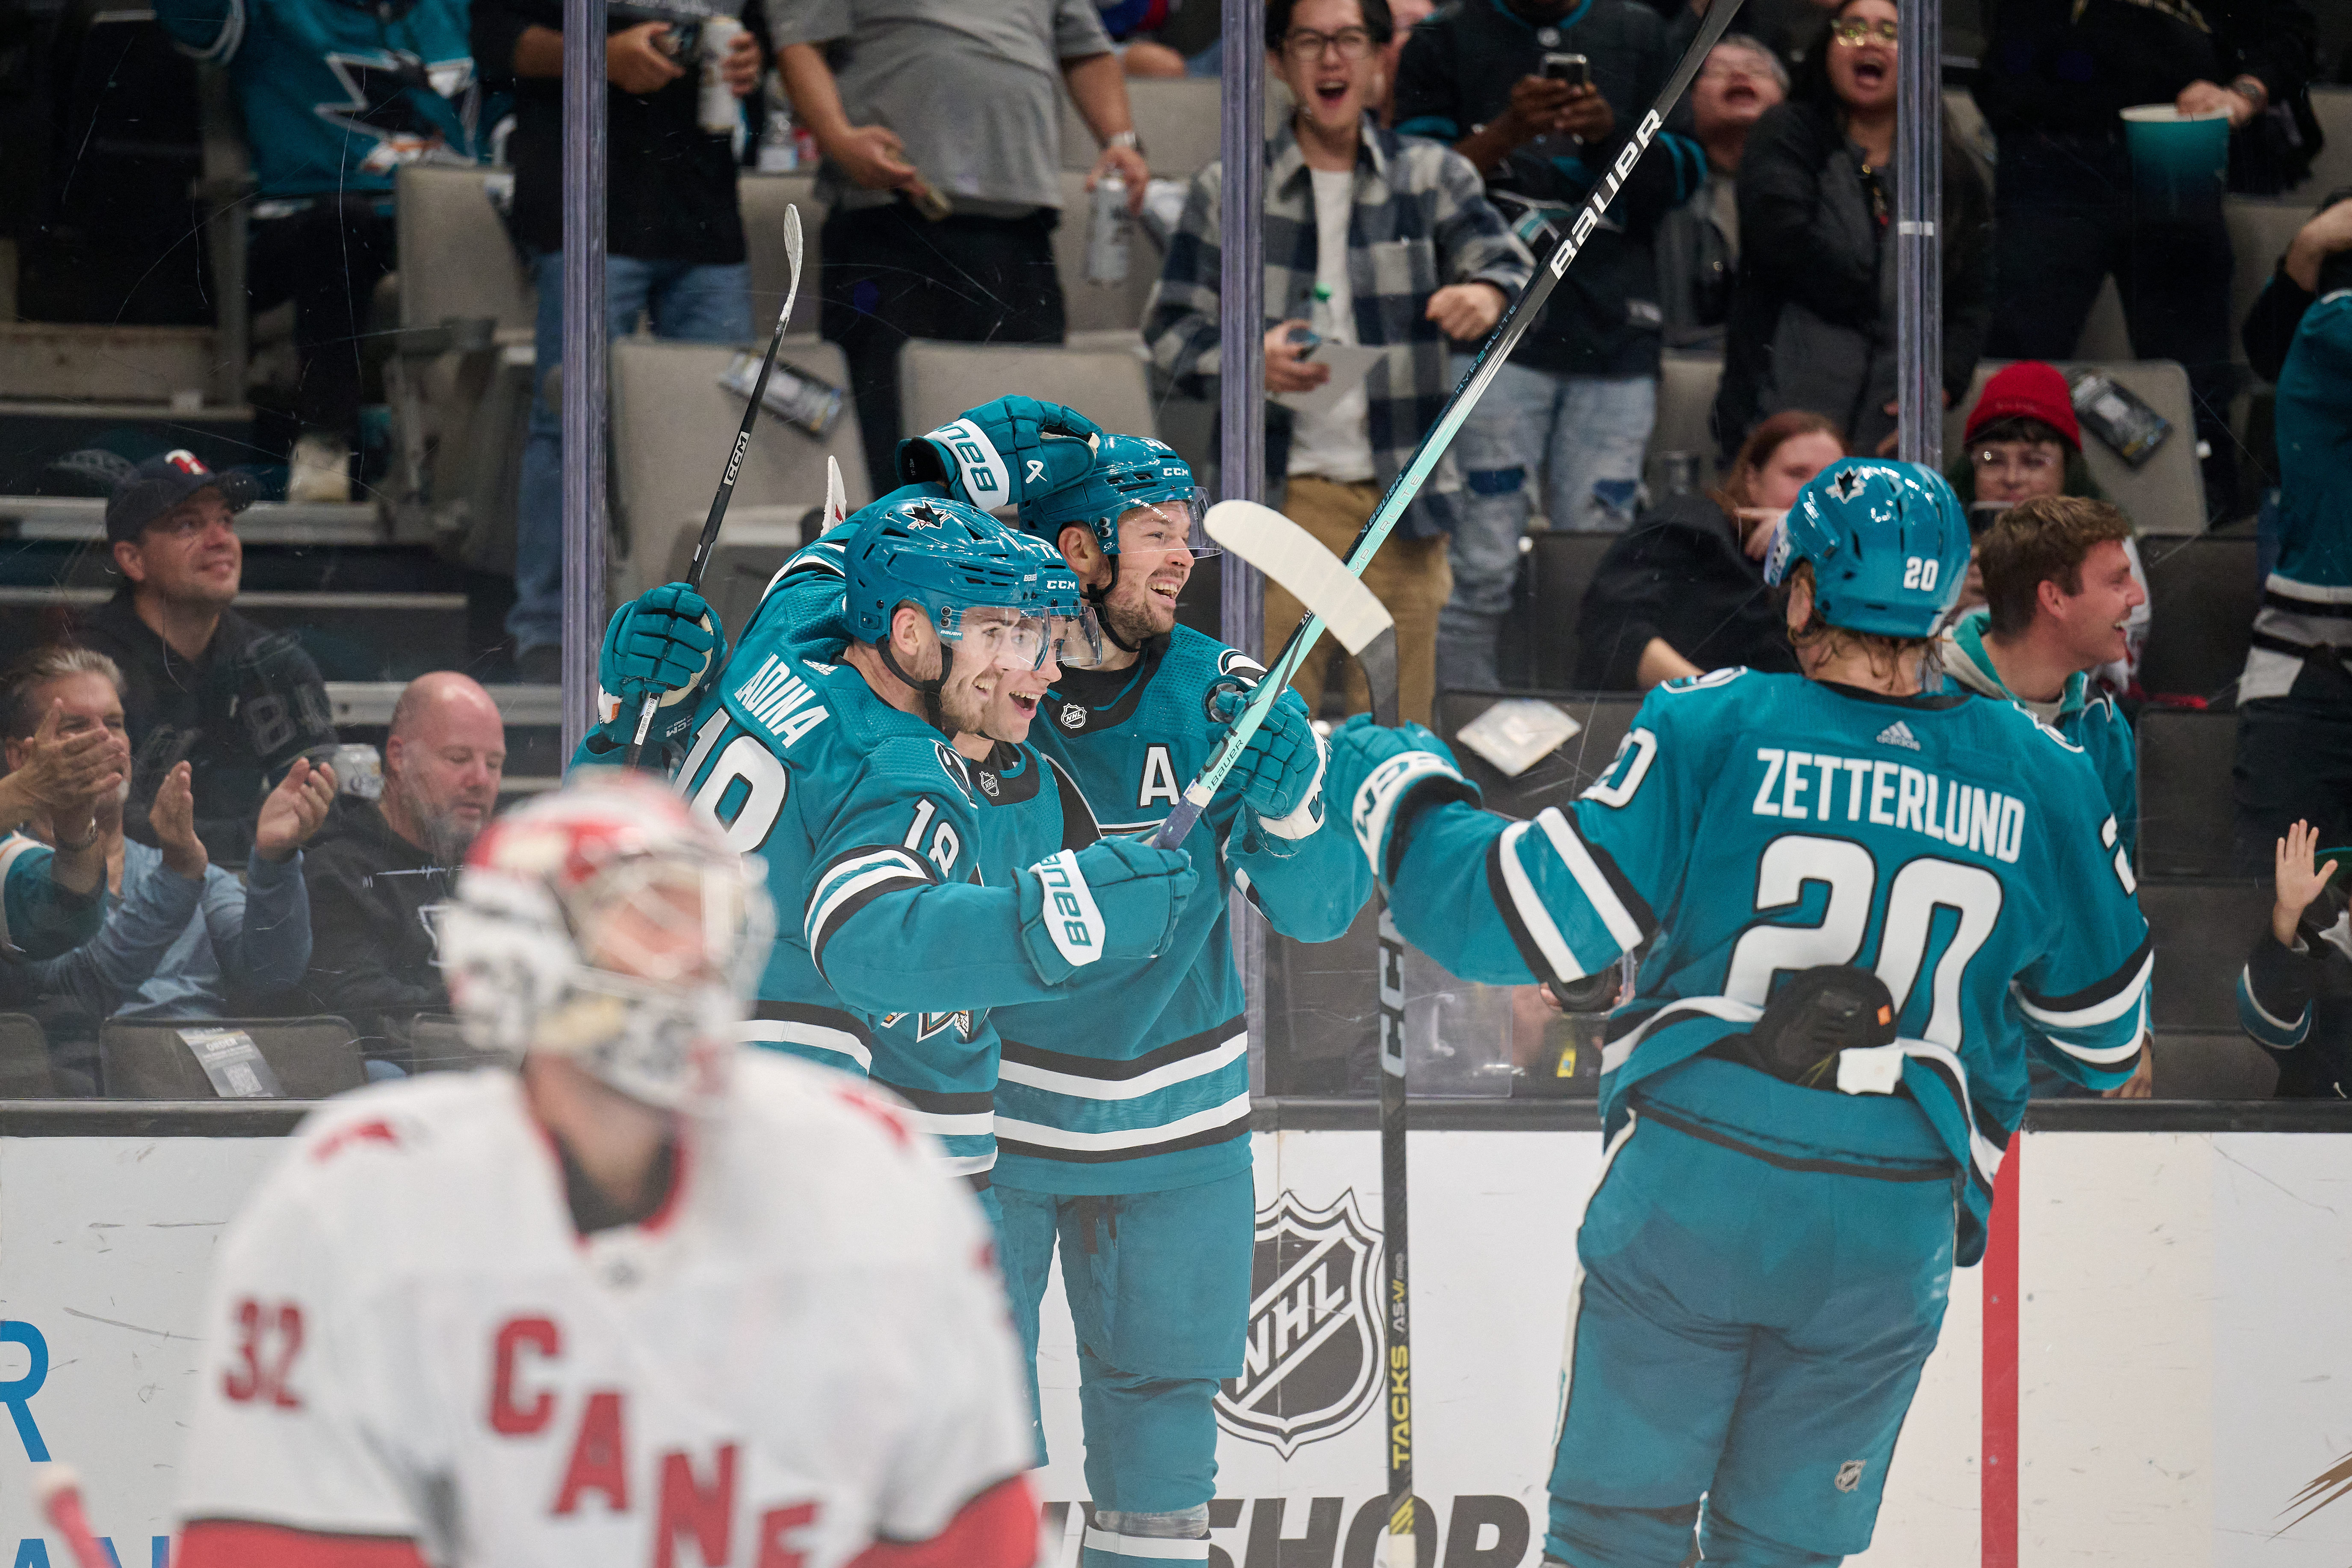 Seth Jarvis scores twice, helps 'Canes rally past Sharks